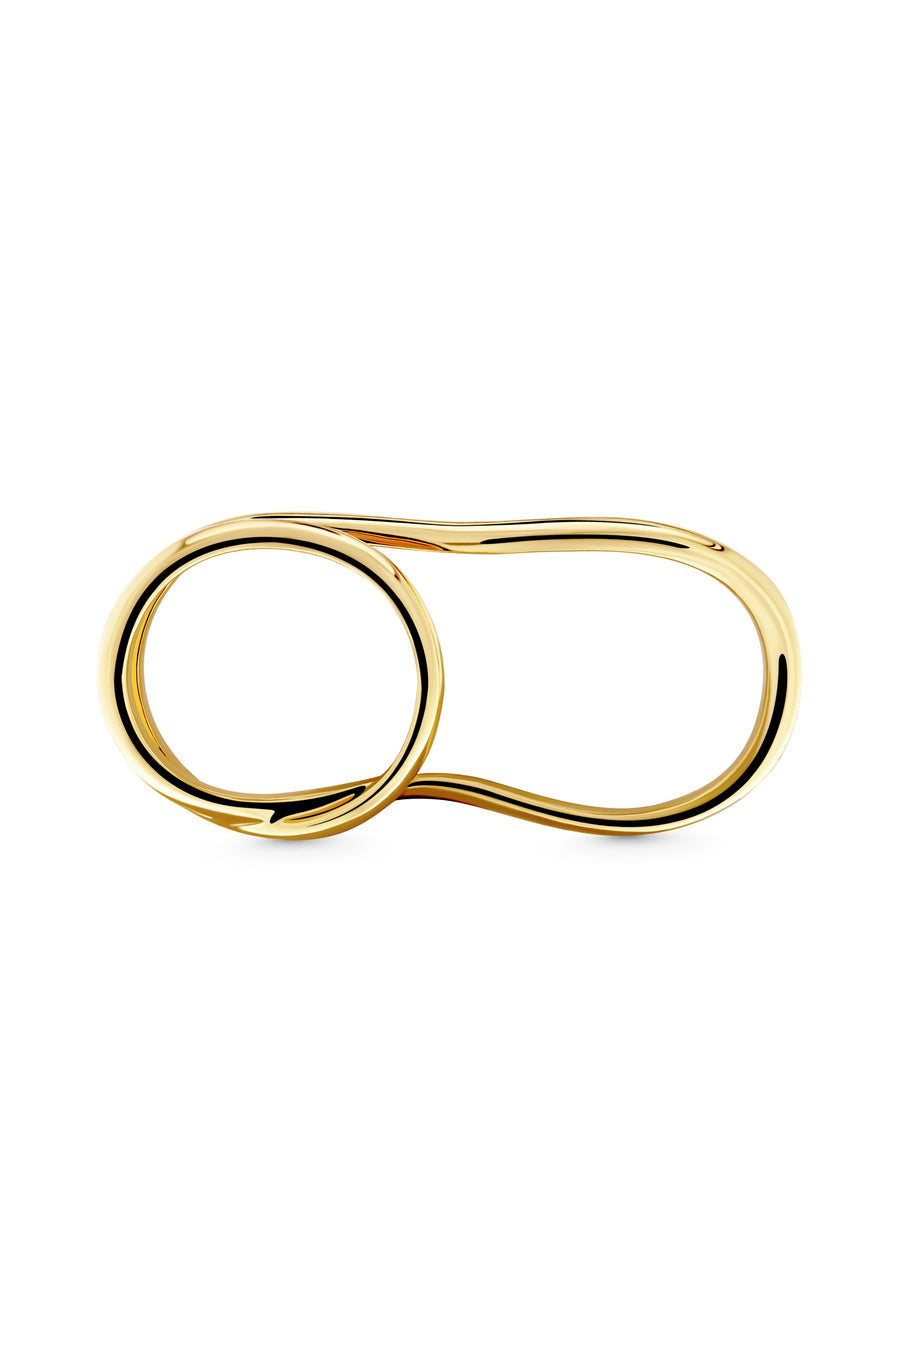 INFINITY Ring. Two-finger ring, slim band wrapping the fingers, size US7, 18K gold vermeil, handmade, hypoallergenic, water-resistant